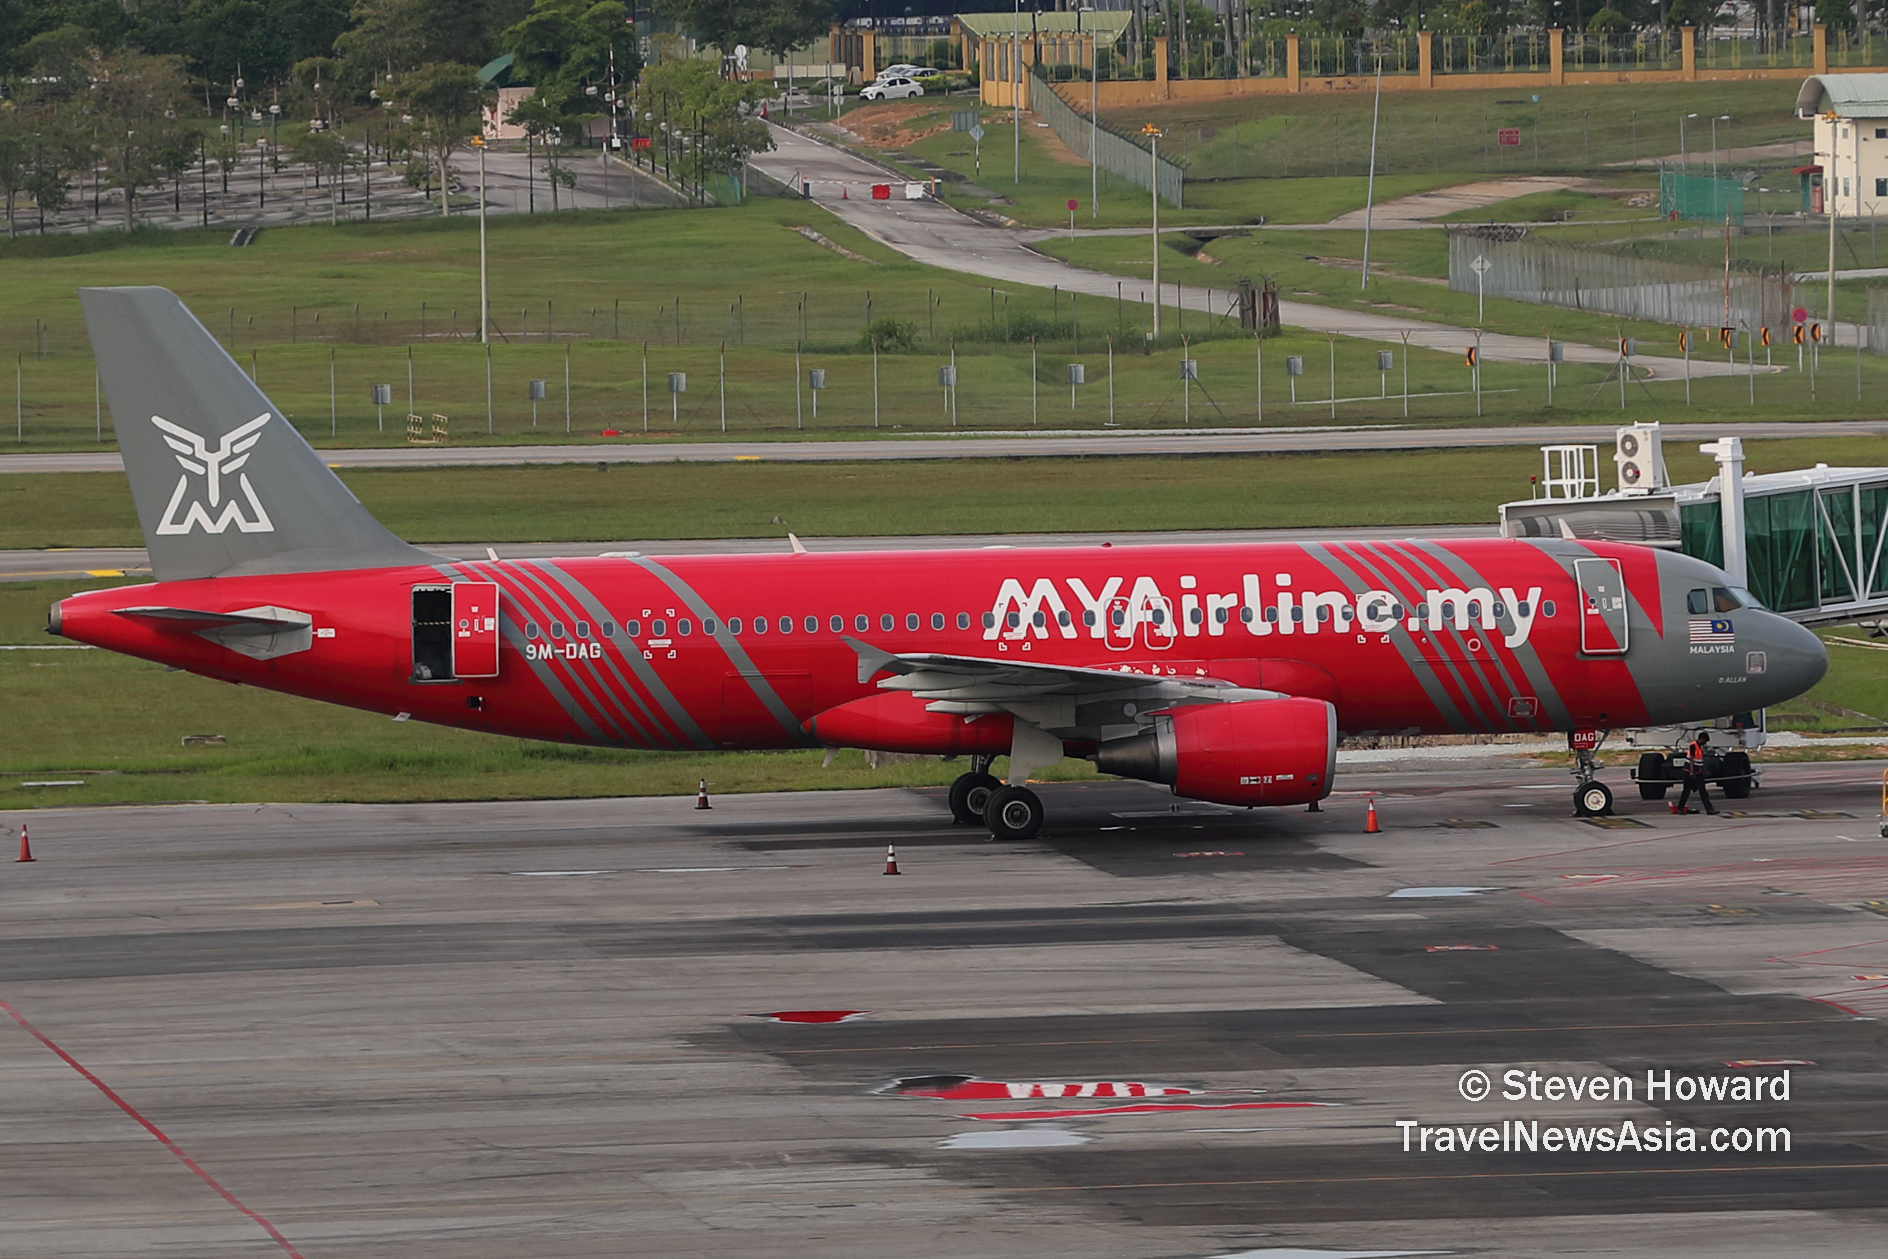 MYAirline A320 at klia2. Picture by Steven Howard of TravelNewsAsia.com Click to enlarge.